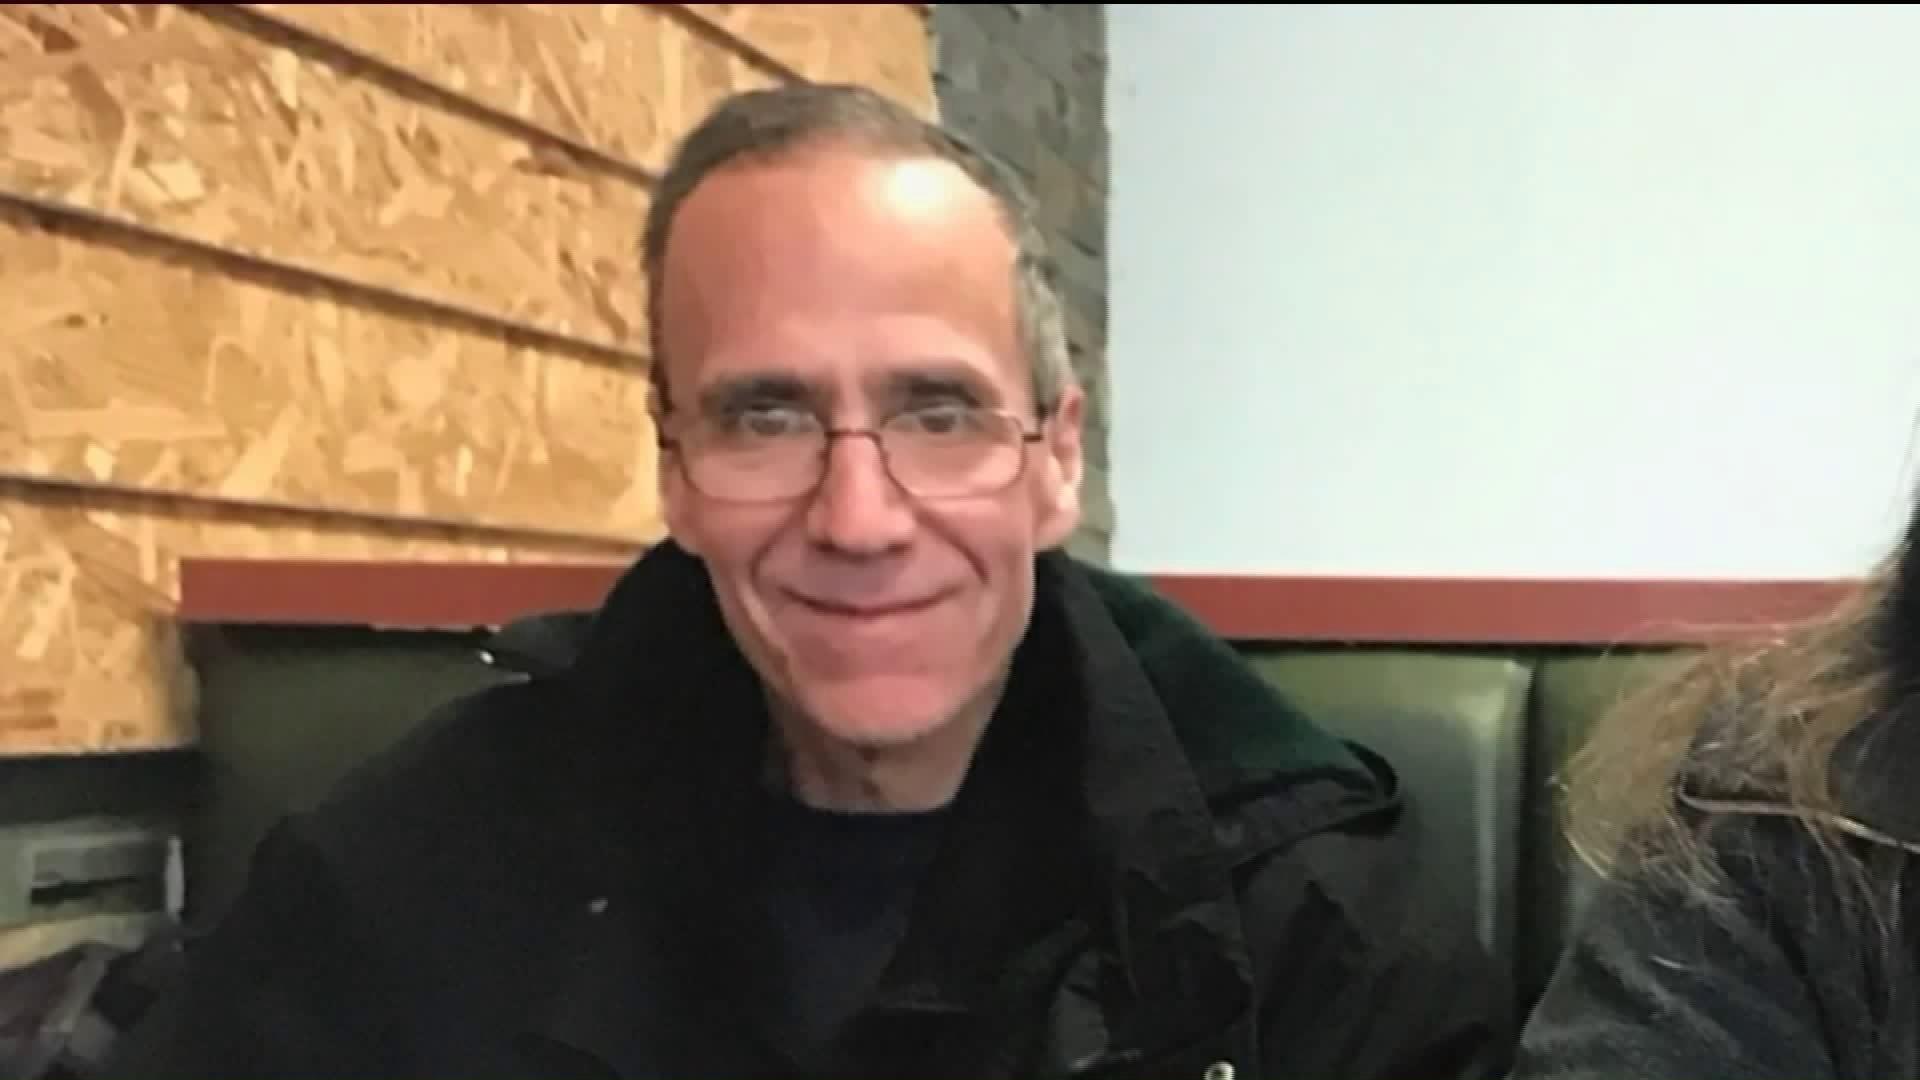 Search continues for missing man